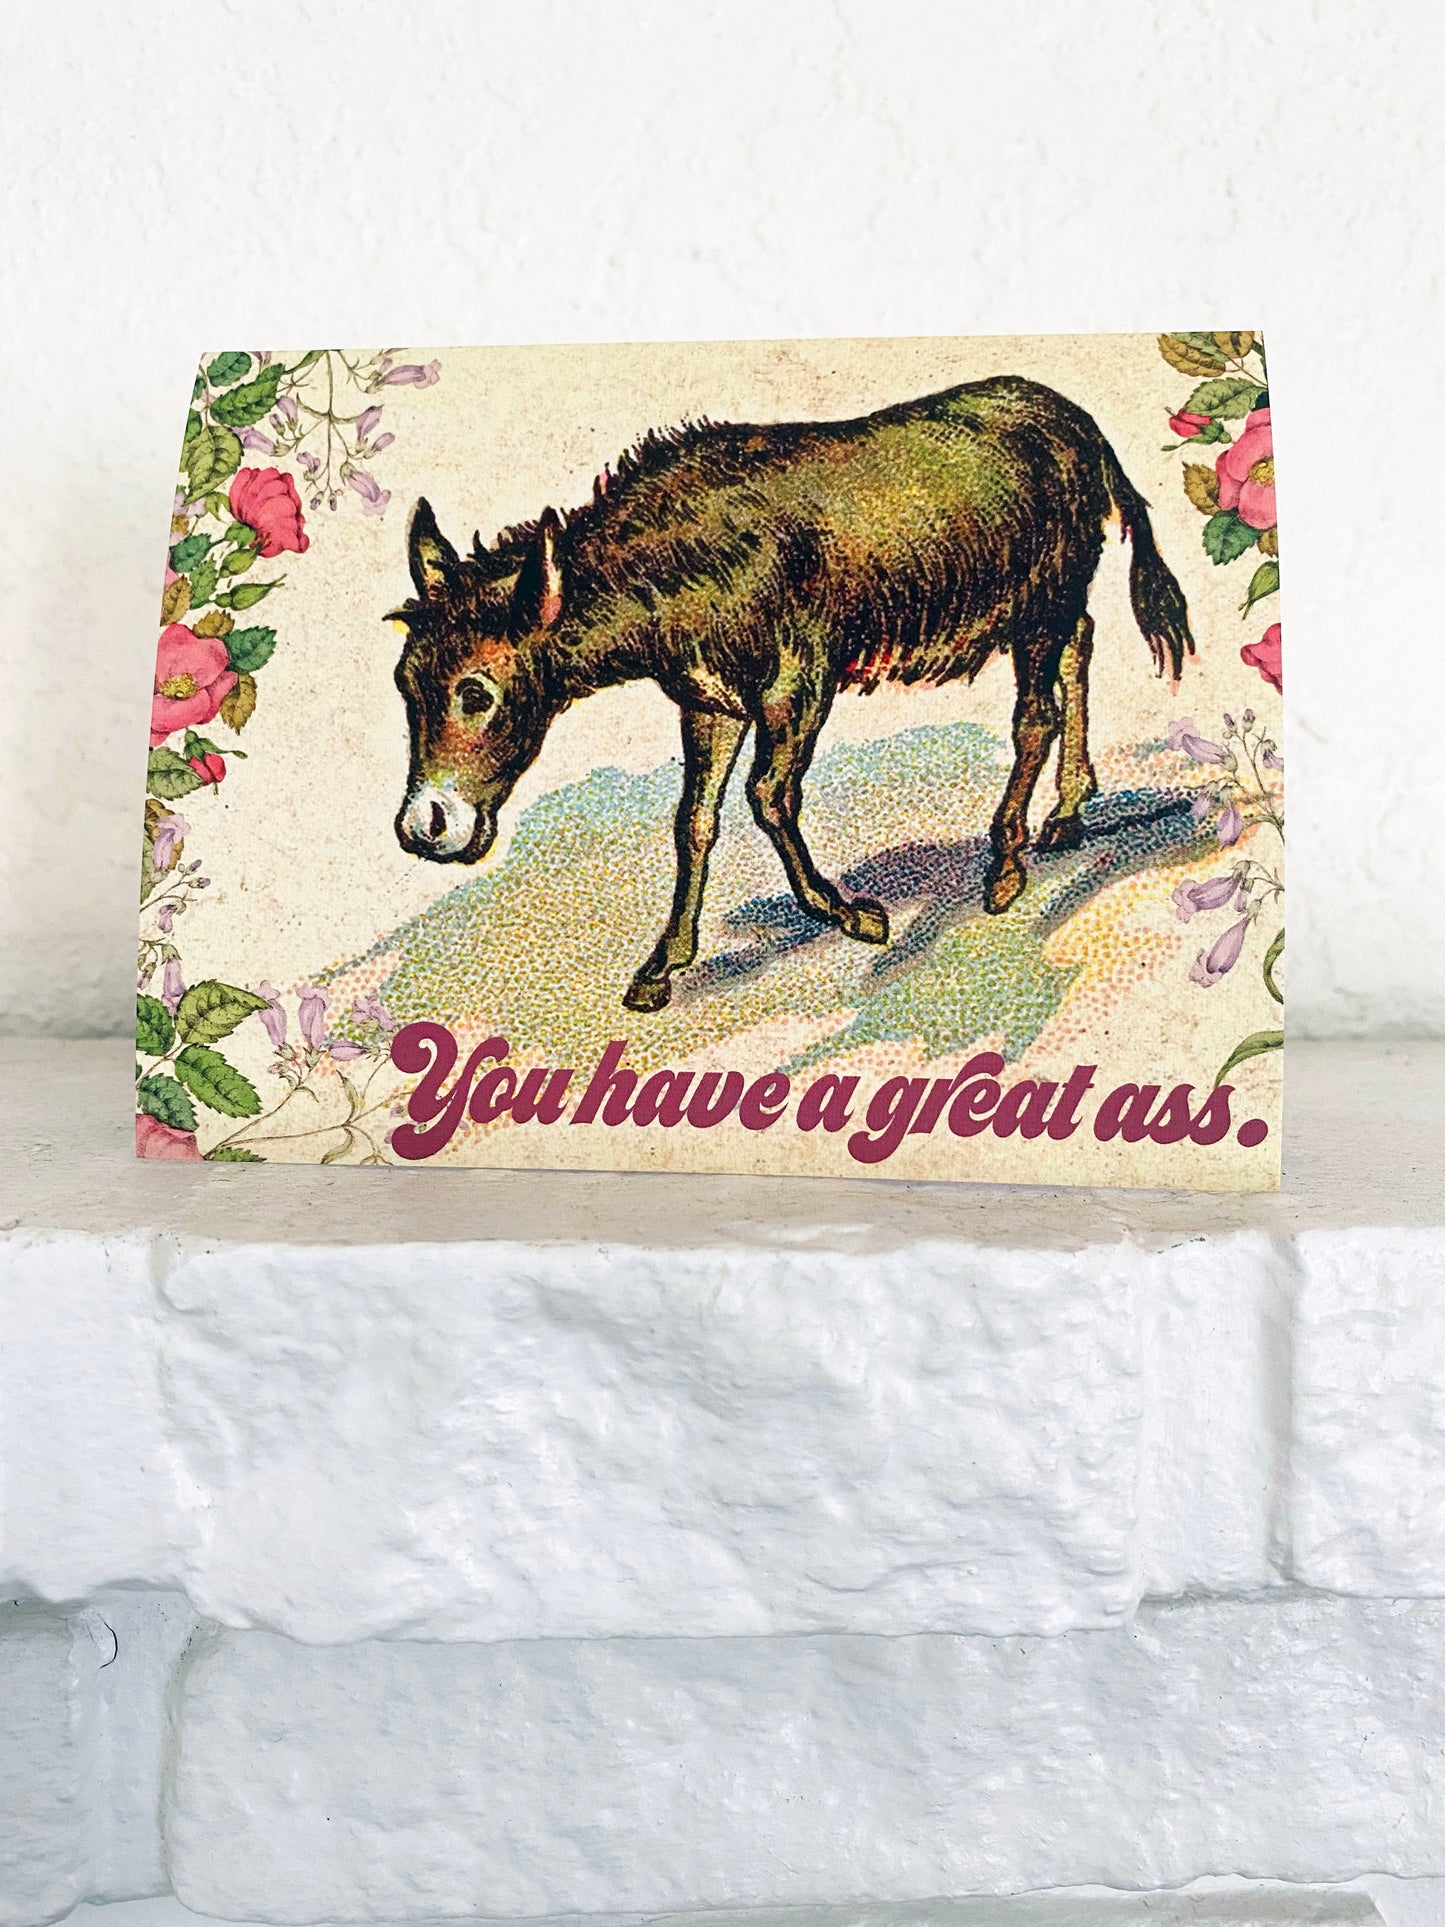 greeting card vintage design donkey you have a great ass funny greeting card vintage style donkey with flowers coin laundry montana fun cards